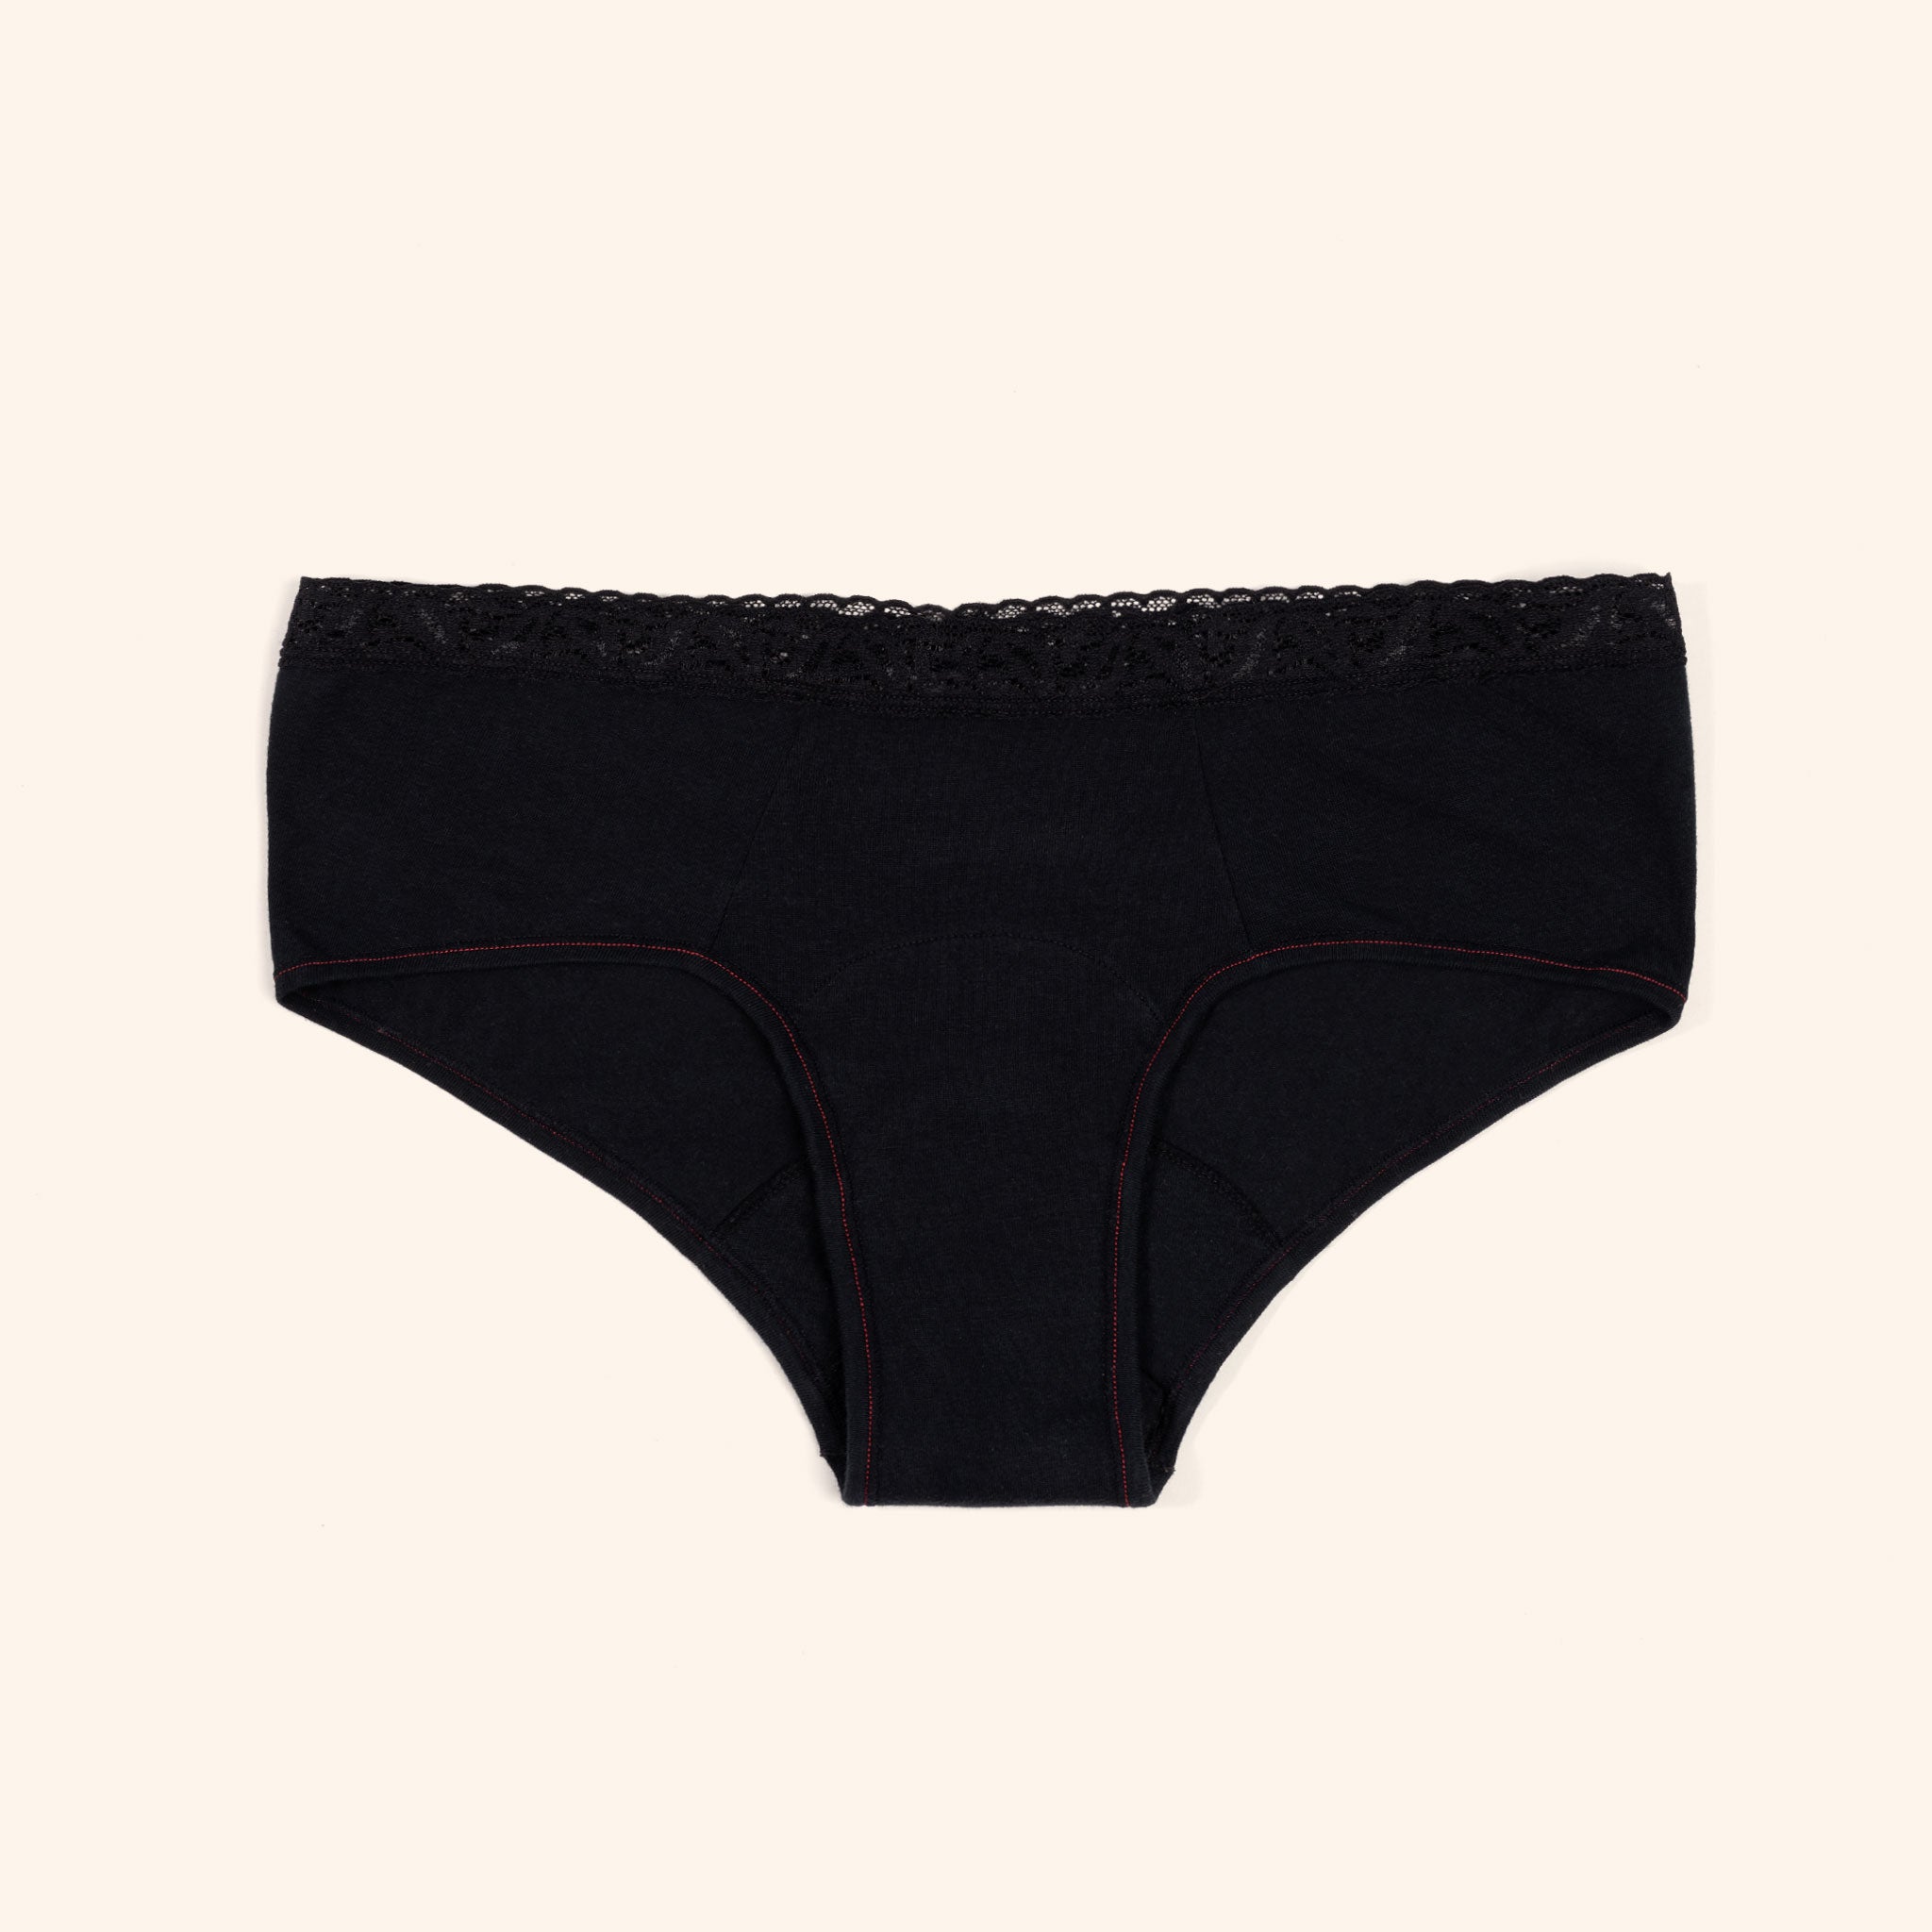 The Shorty Lace Solo Panty